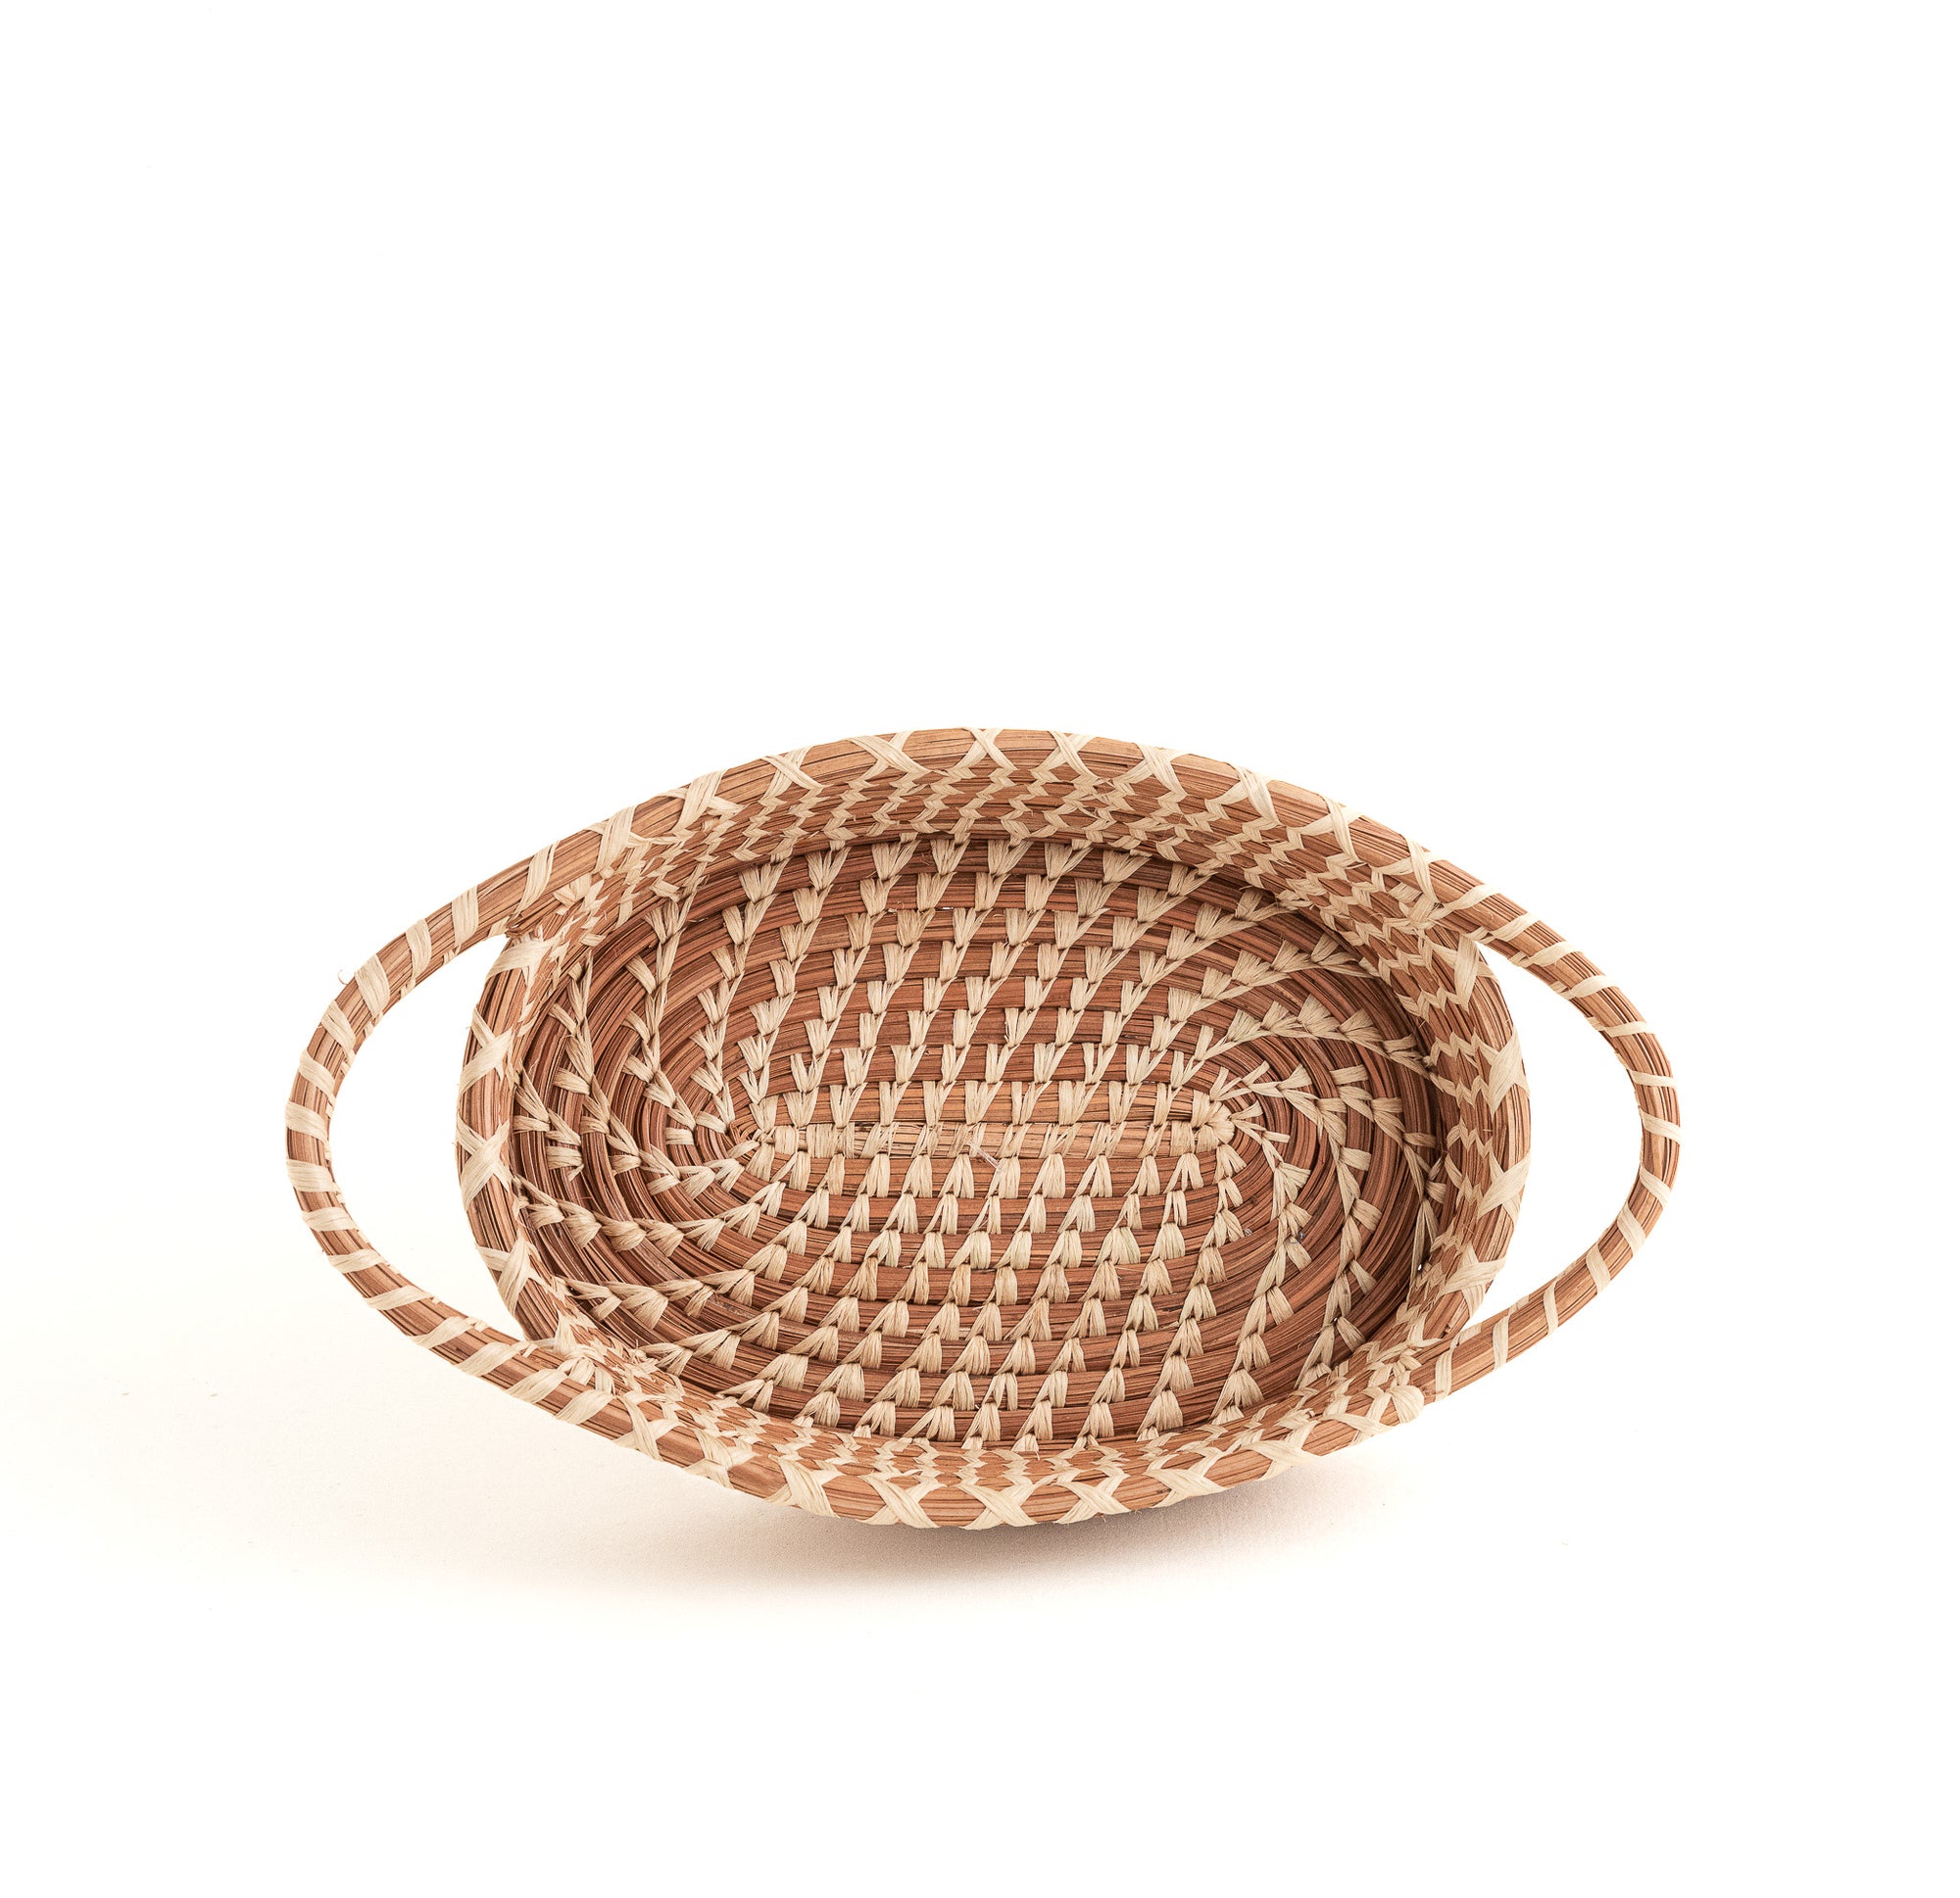 oval pine needle basket with handles, showing intricate stitches